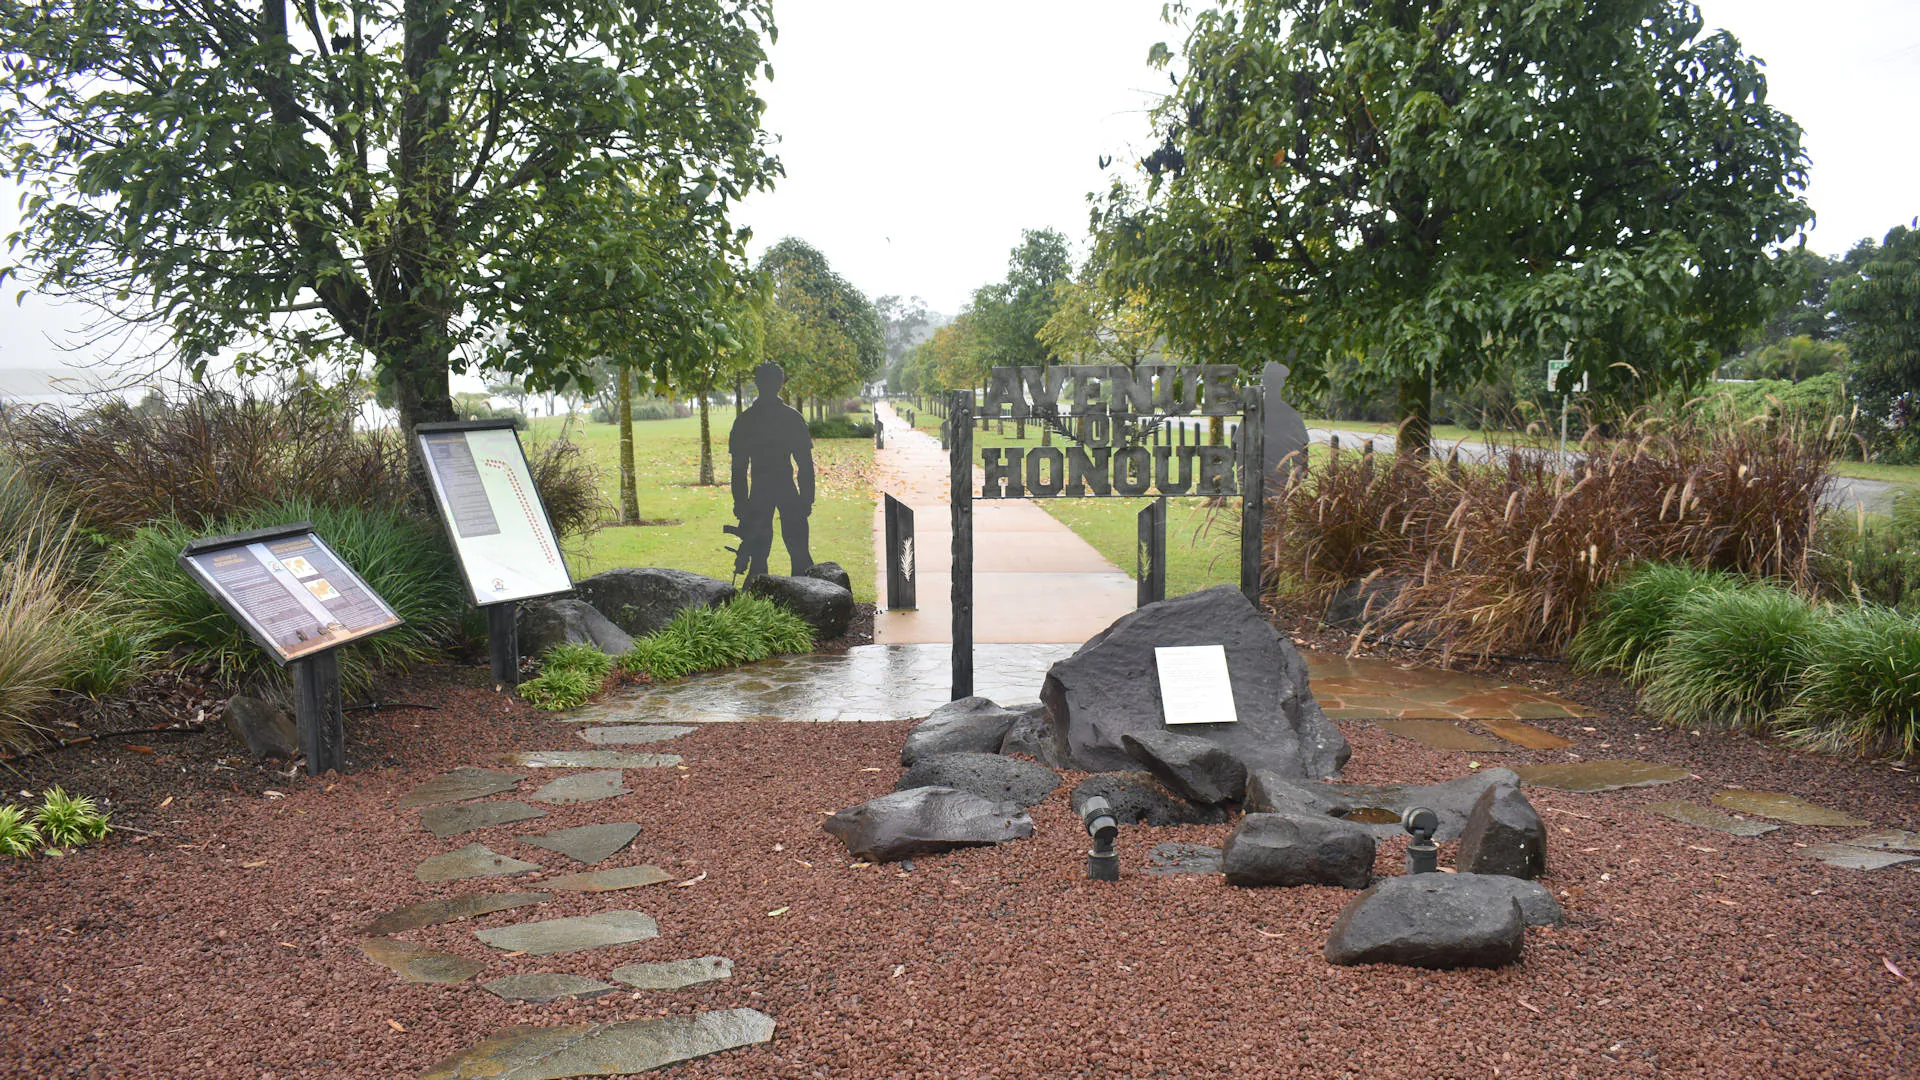 Entrance to the Afghanistan Avenue of Honour in Yungaburra